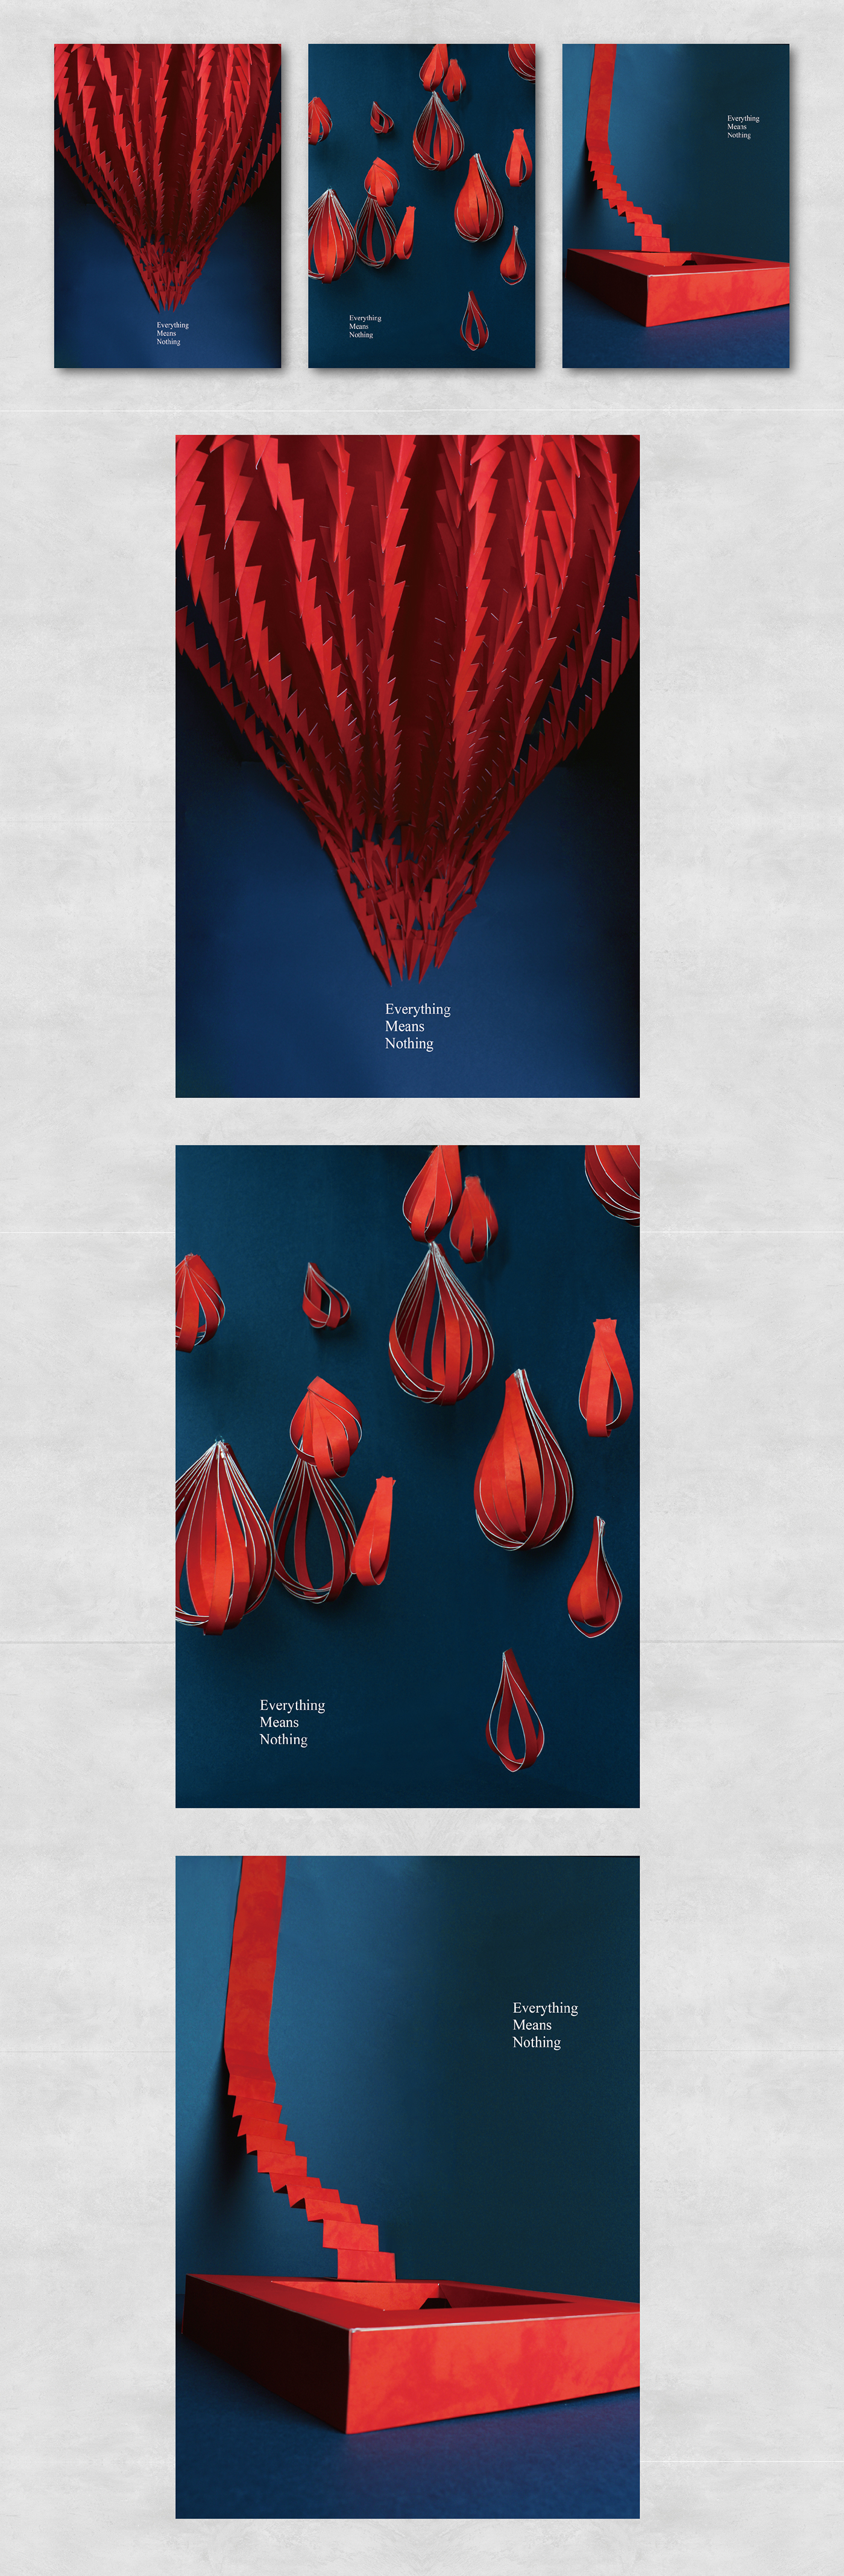 Poster Design visual design graphic design  Origami Art fine art Layout Visual Communication Photography  art photography red